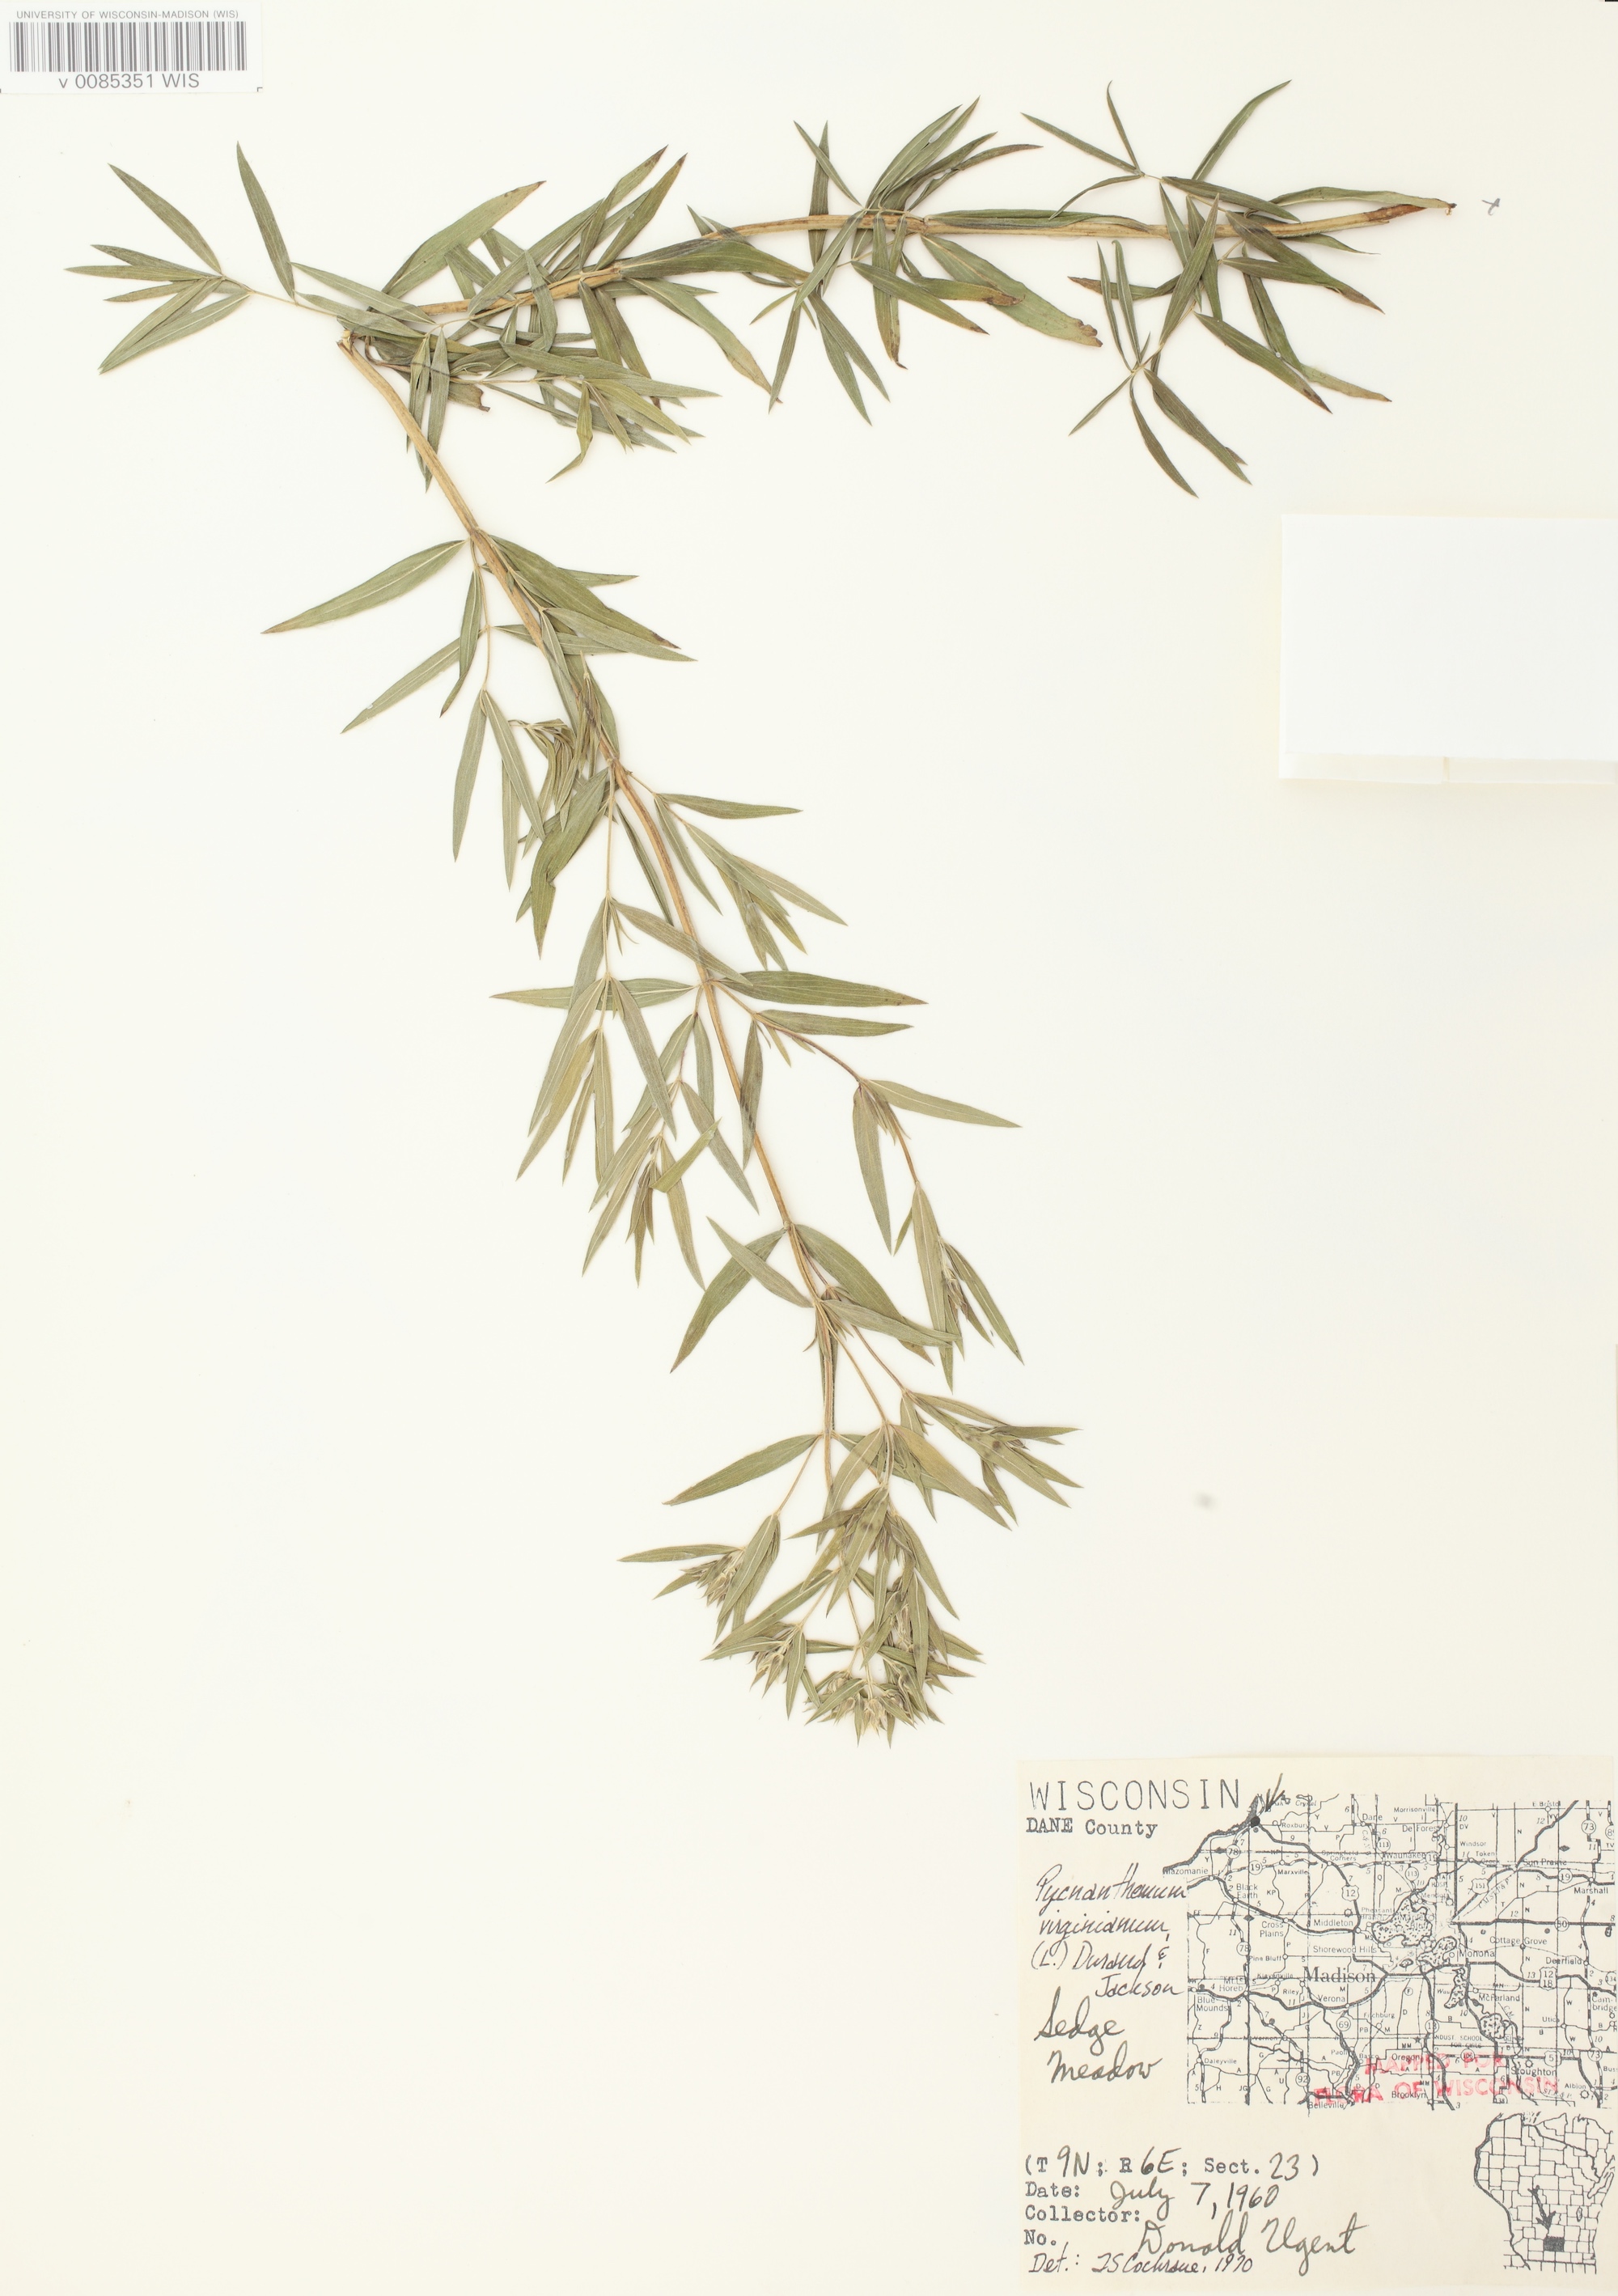 Common Mountain Mint specimen collected in Dane County, Wisconsin in a sedge meadow on July 7, 1960.